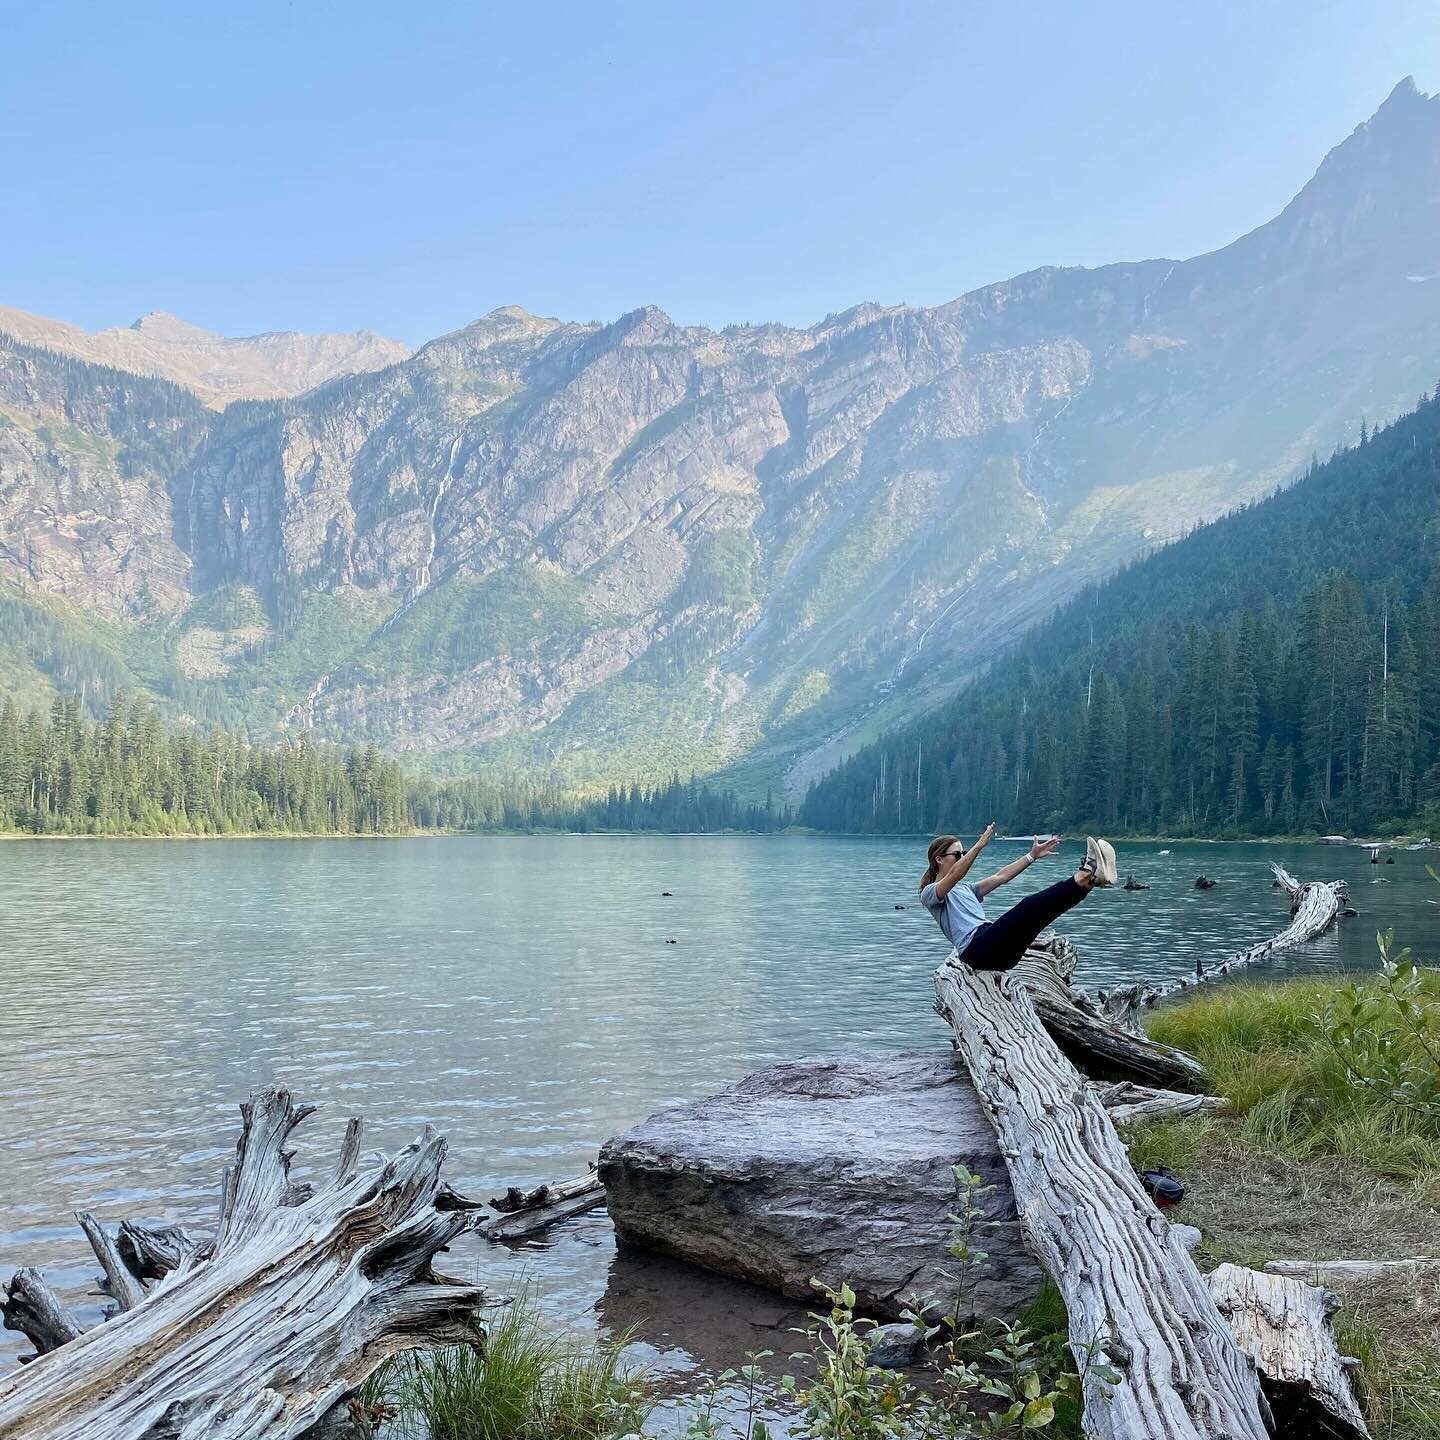 We just can&rsquo;t wait for Spring! Swipe to see some of our favorite non-studio pilates practice locations for when the sun is shining ☀️🌷🌱

1 - Glacier National Park
2 - Zion National Park
3 - Grand Canyon 
4 - Joshua Tree National Park
5 - Josh